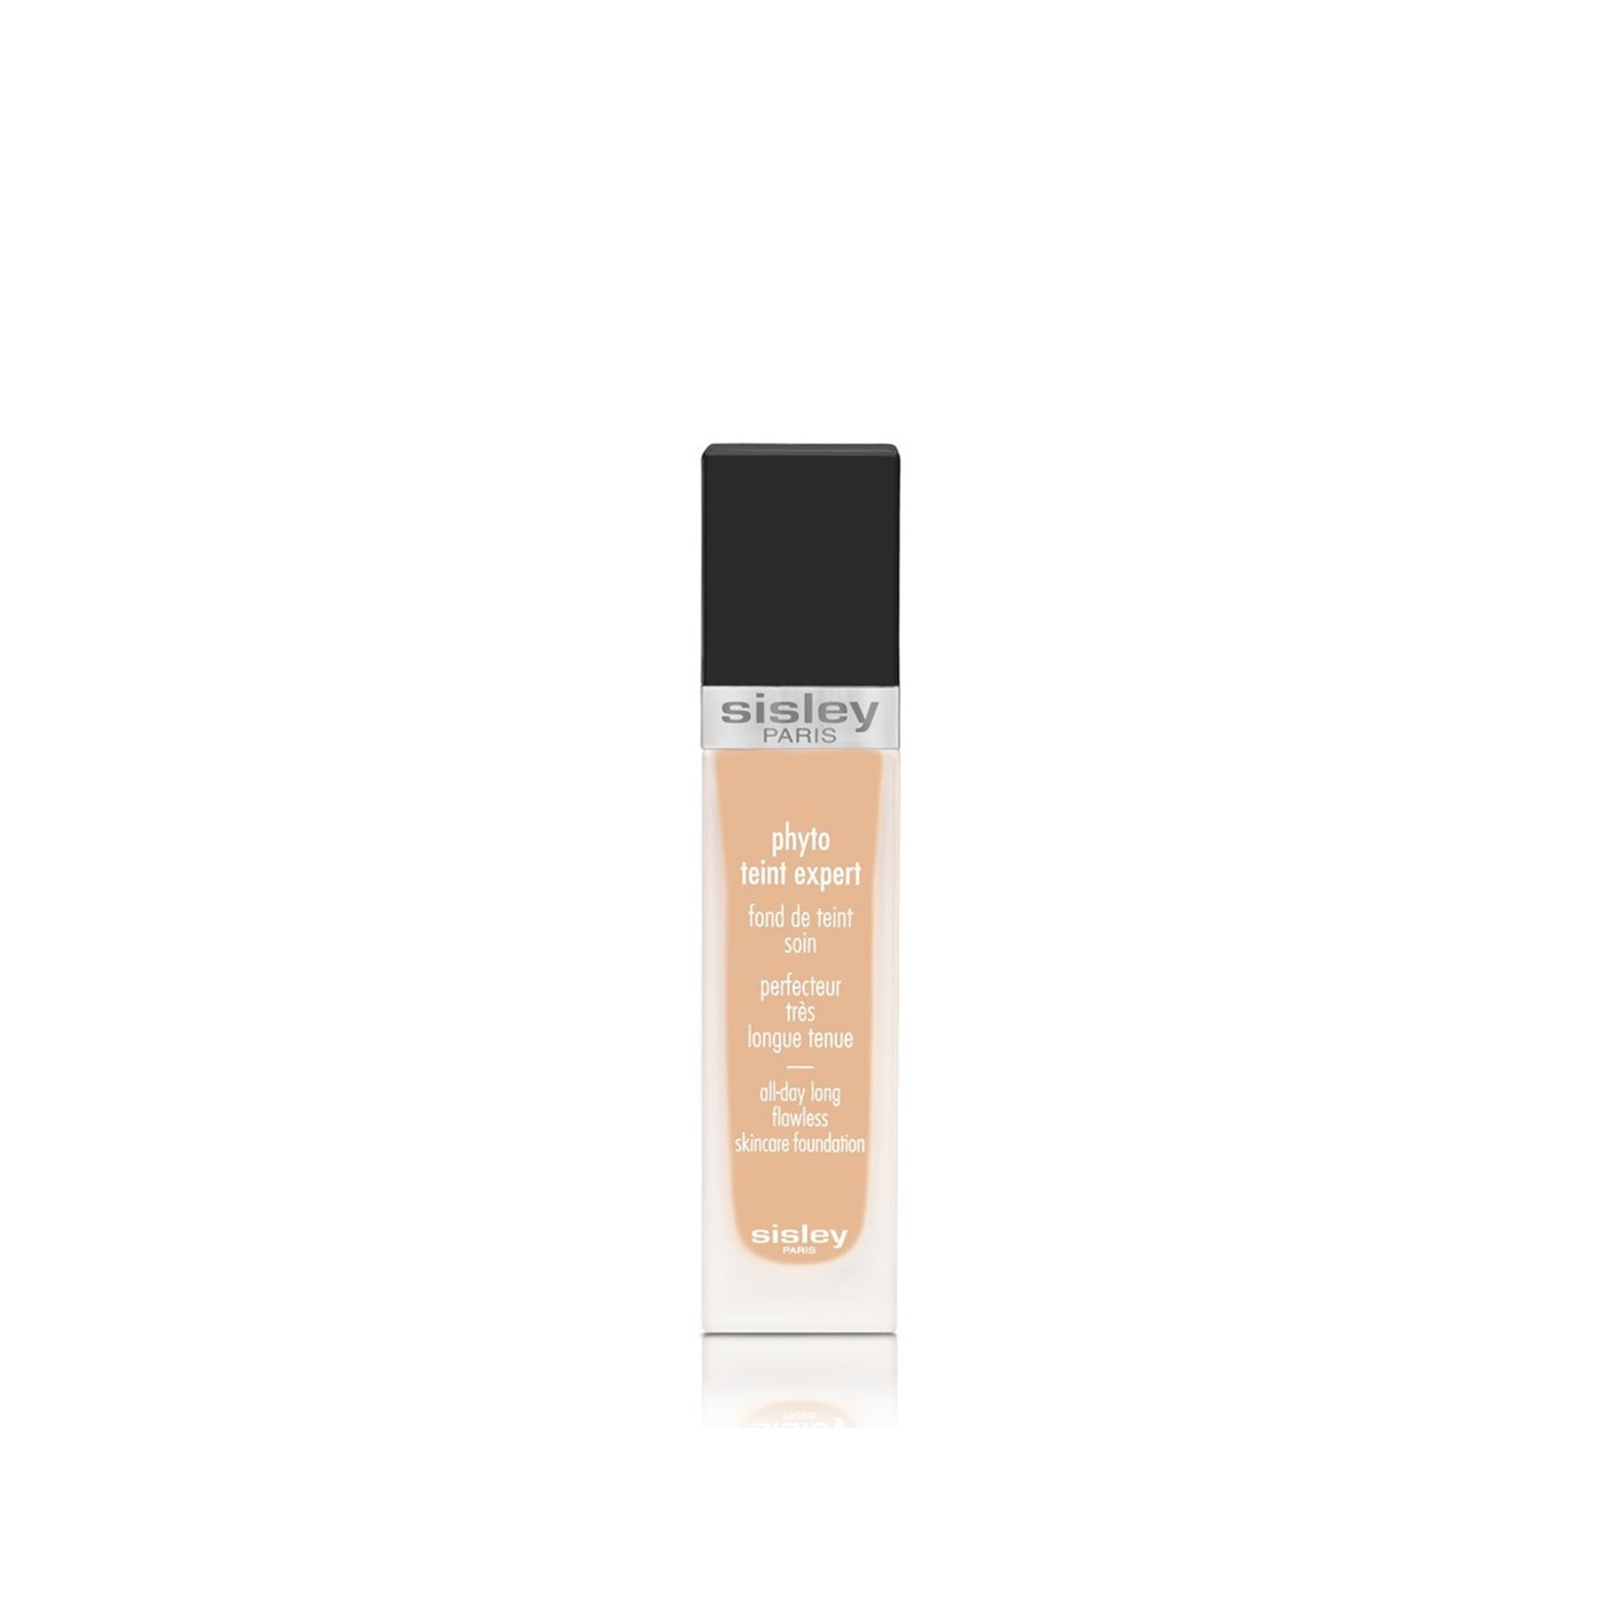 Sisley Paris Phyto Teint Expert All-Day Long Flawless Skincare Foundation 2 Soft Beige 30ml